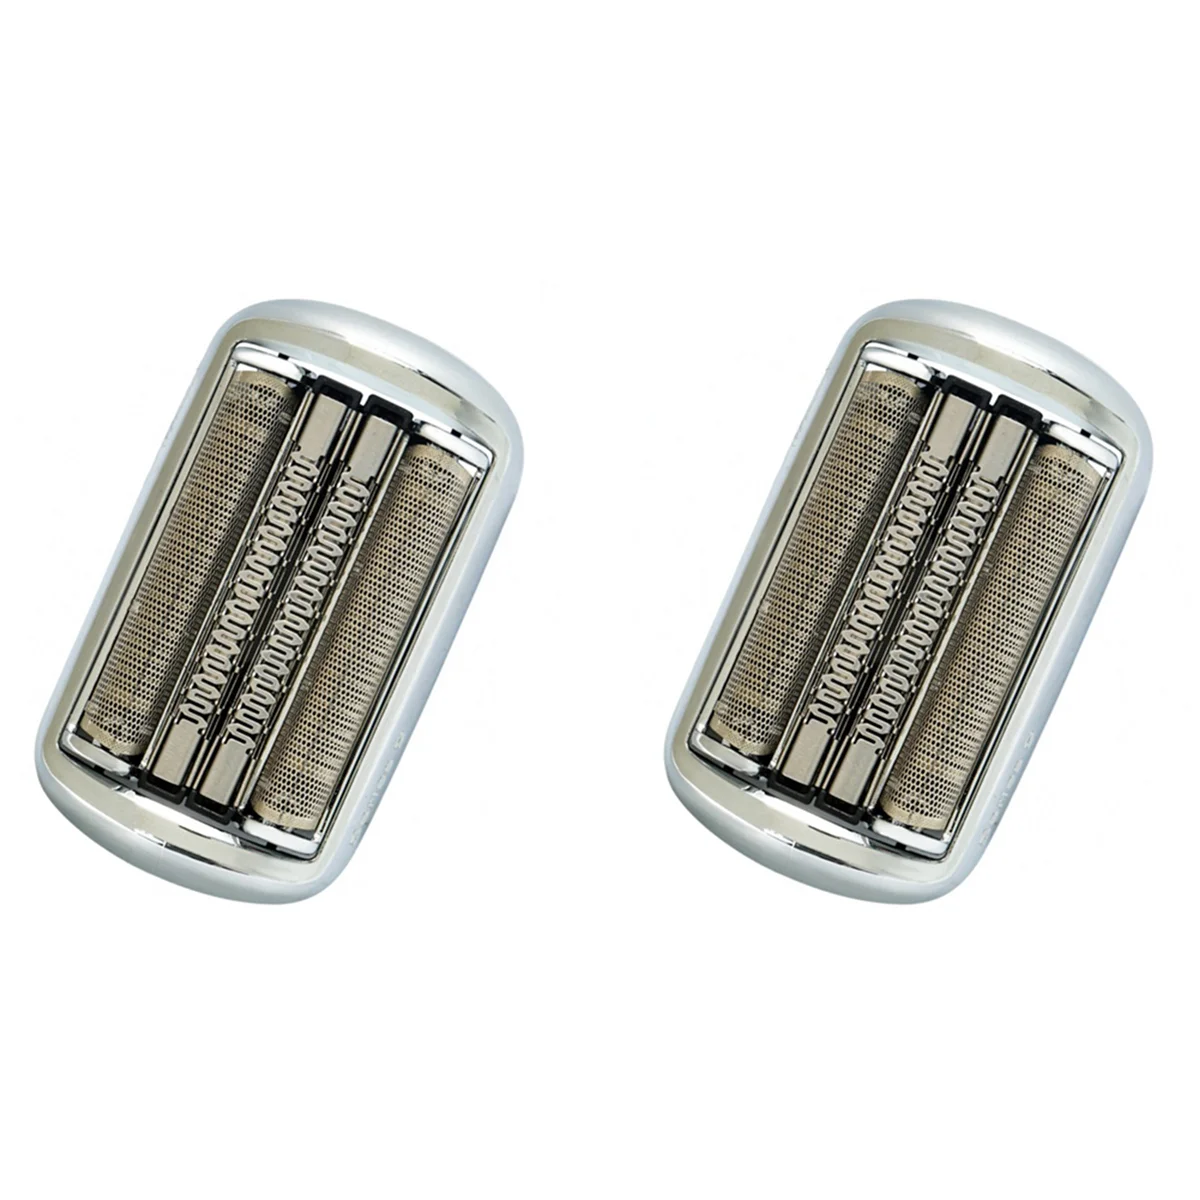 

2X Shaver Replacement Head for Braun 92S 92M 90S 94M Electric Shaver Series 9 Shaving Machines